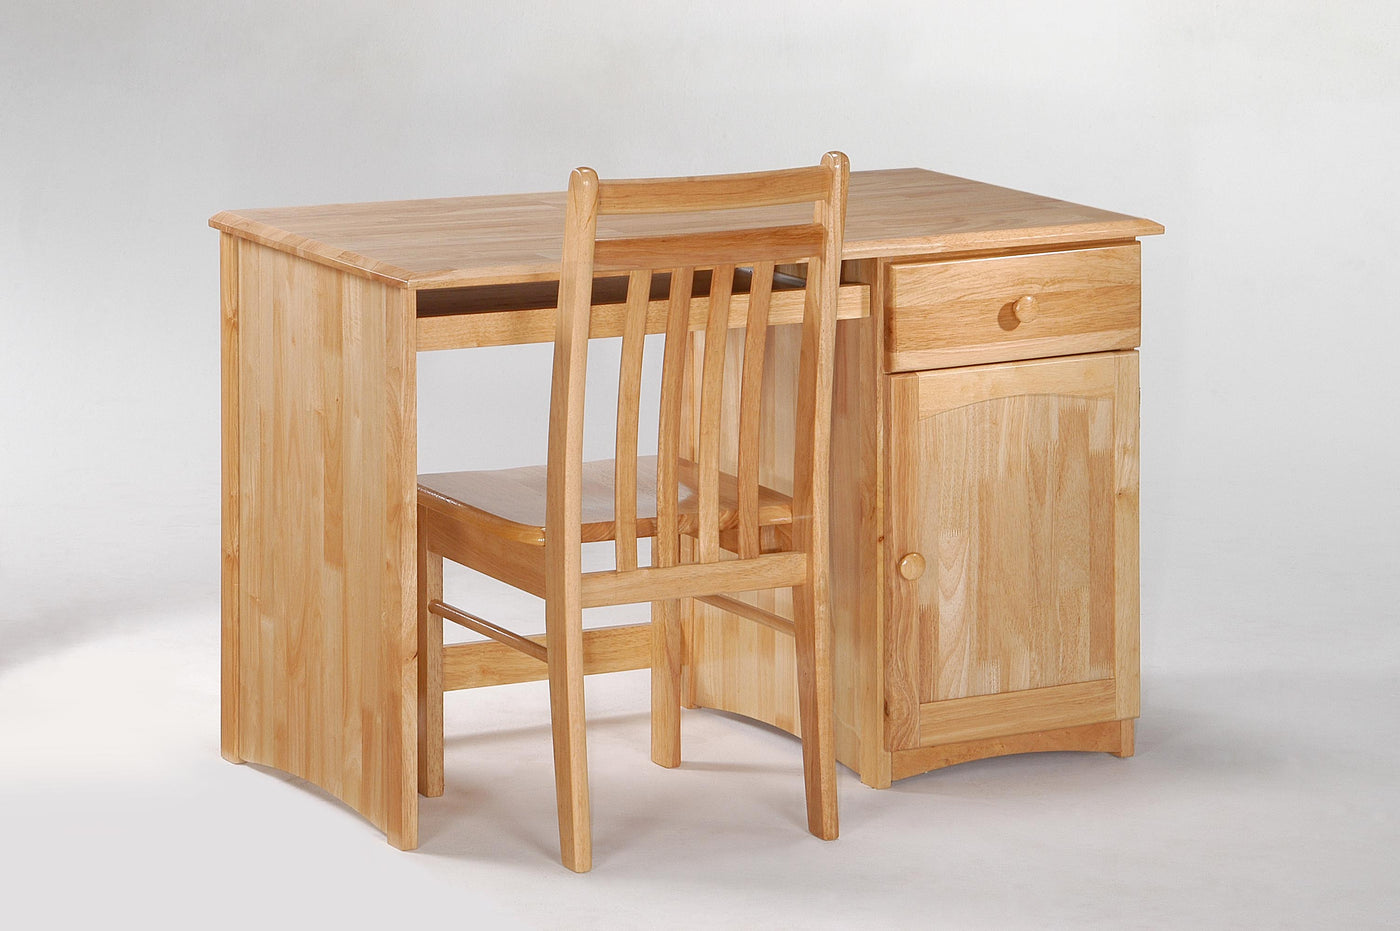 Clove Student Desk and Chair